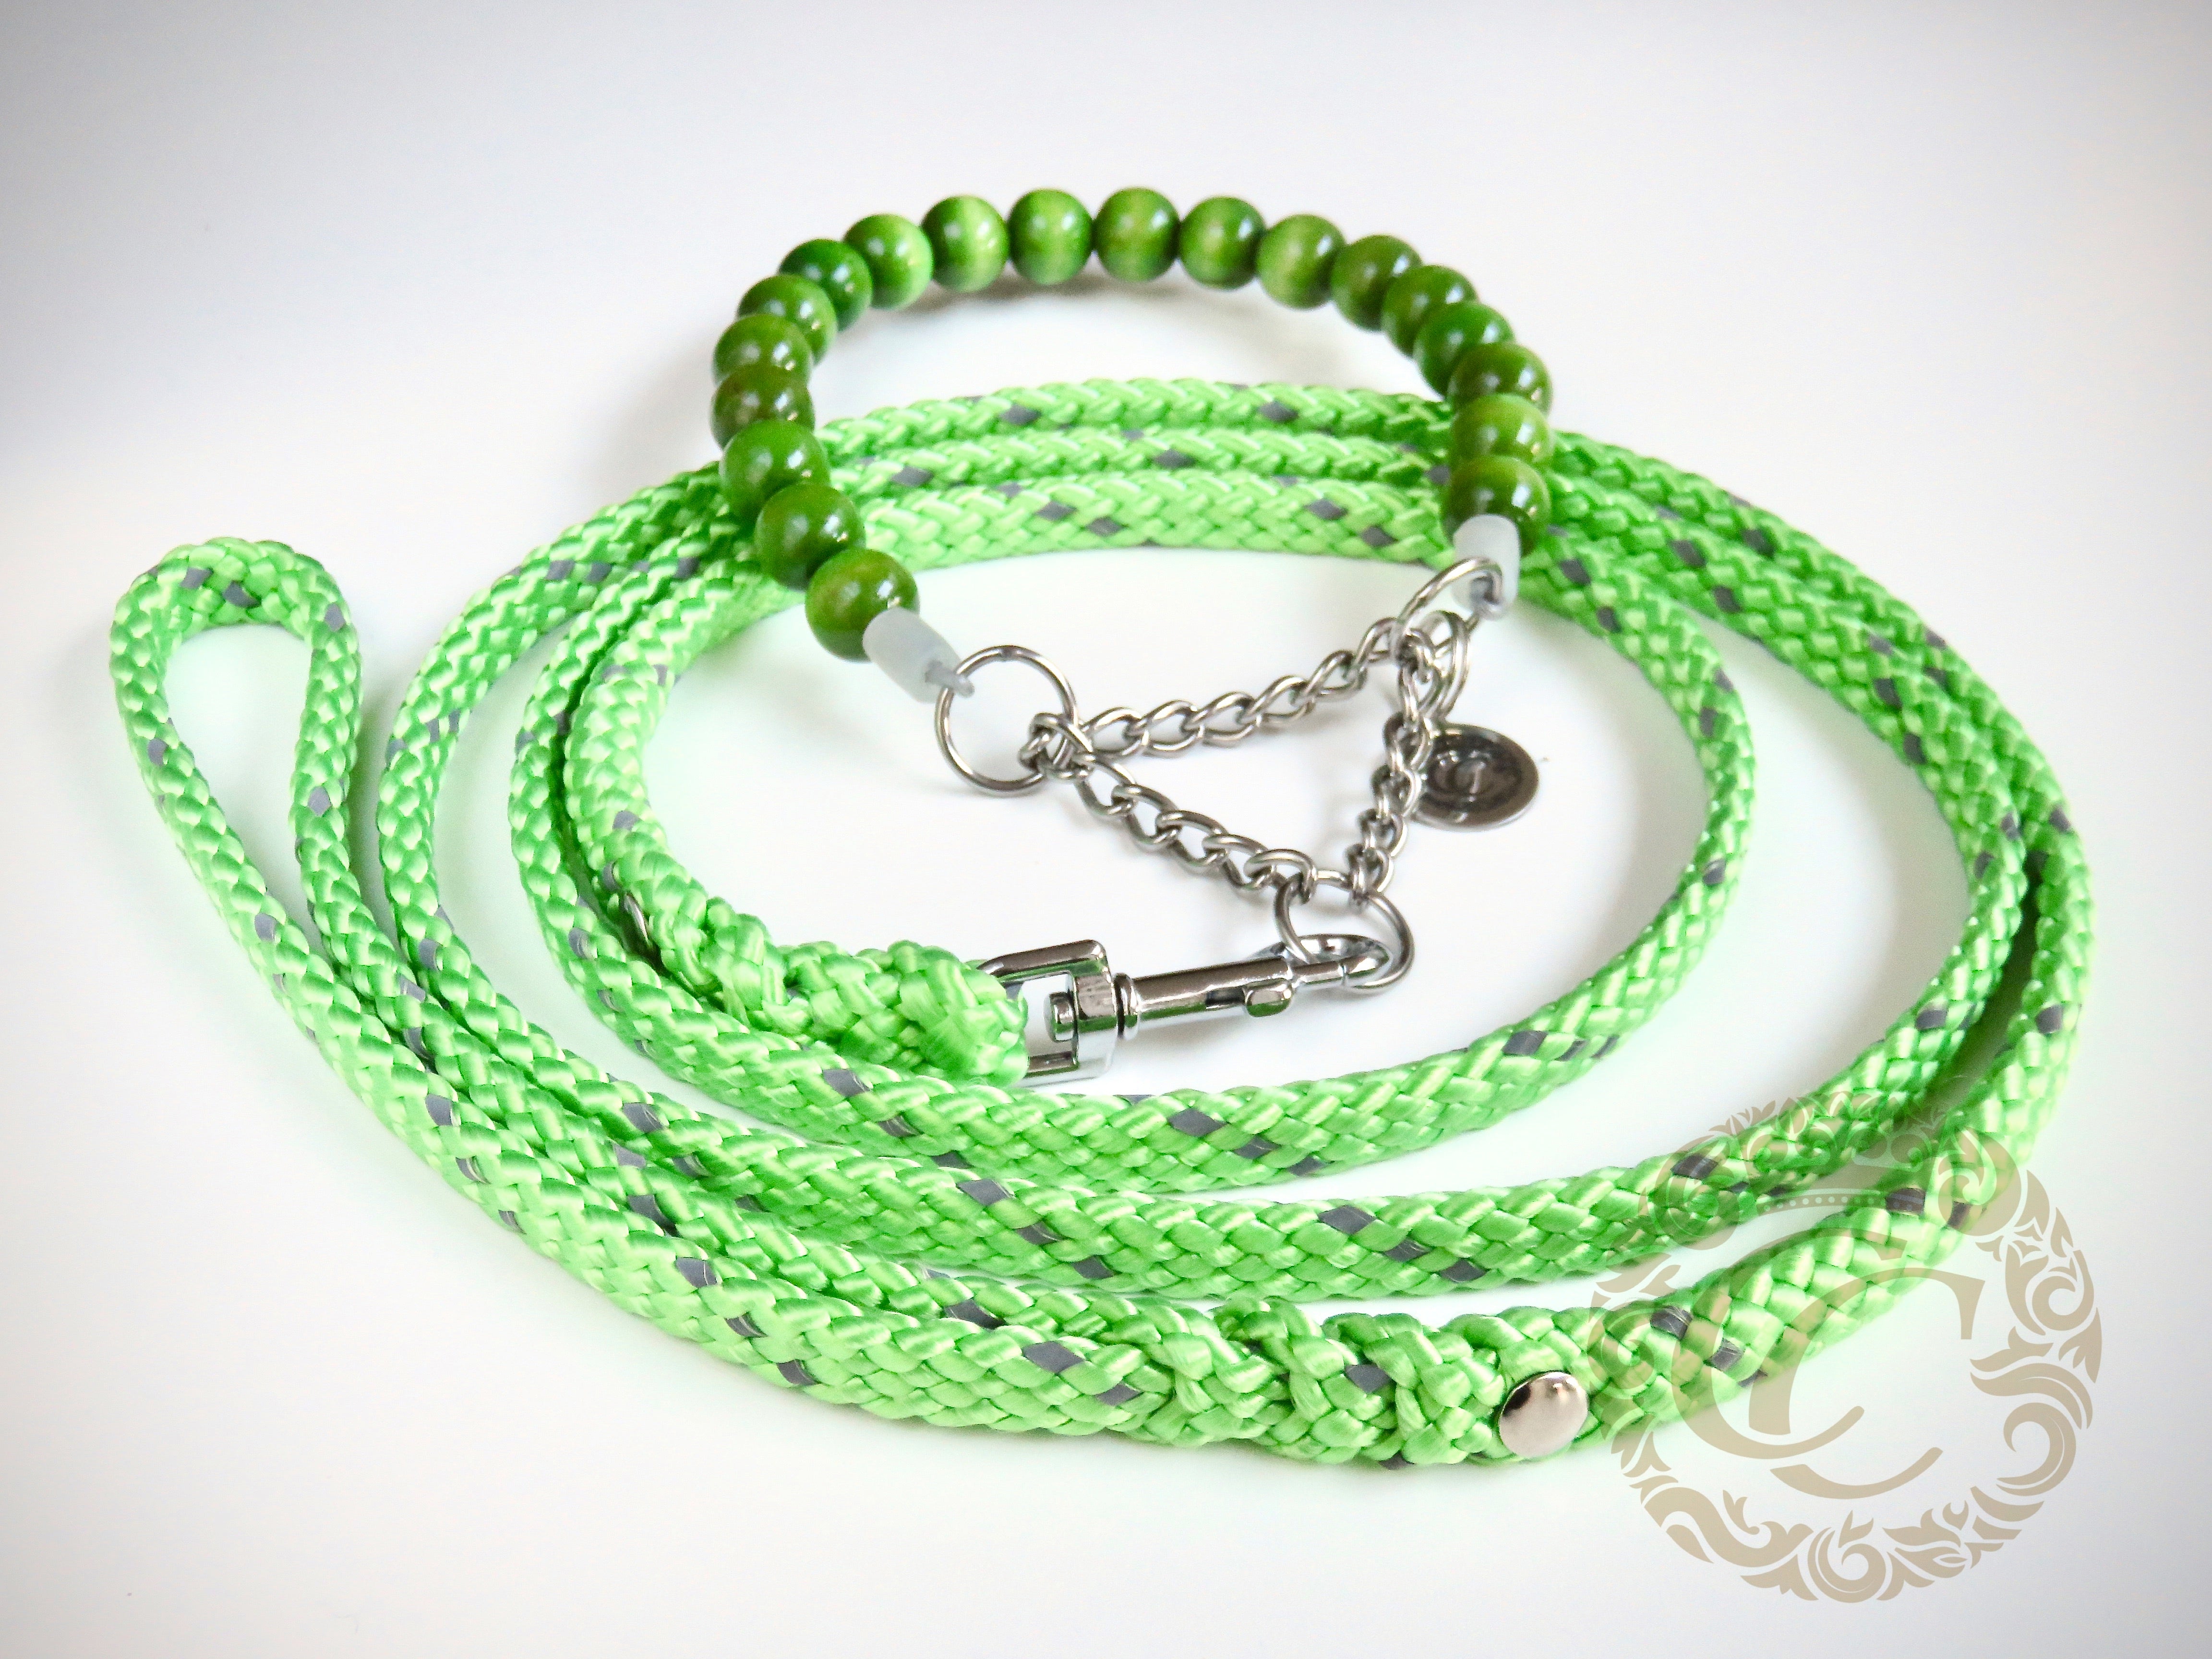 Dog leash for small & medium dogs Reflective Green | CollarCrafts dog leashes and collars | Dog leash paracord | Dog leash washable | Green dog lead | Mini dog leashes | Green reflective paracord leash | dog lead | Custom made leashes | Small dog leash | Apple green collar leash set